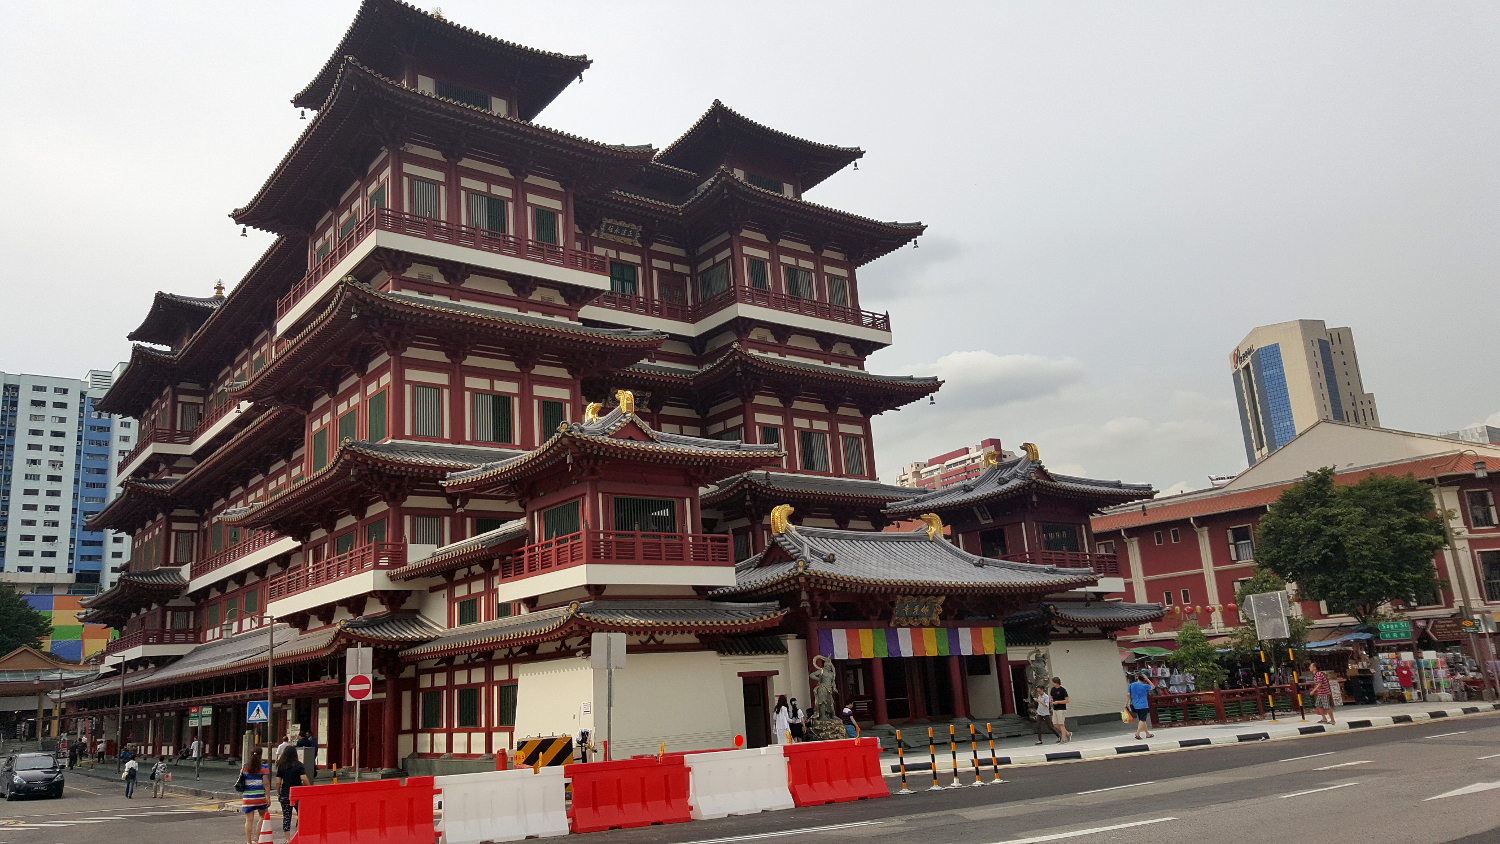 Chinatown in Singapore - one of the best places to see in Singapore. Read this insider's guide to Singapore and discover more things to do in Singapore, where to eat in Singapore, and tips for Singapore. #Singapore #singaporeguide #singaporetraveling #singaporetravel #asiatravel #singaporetravelguide #travelguide #singaporetips